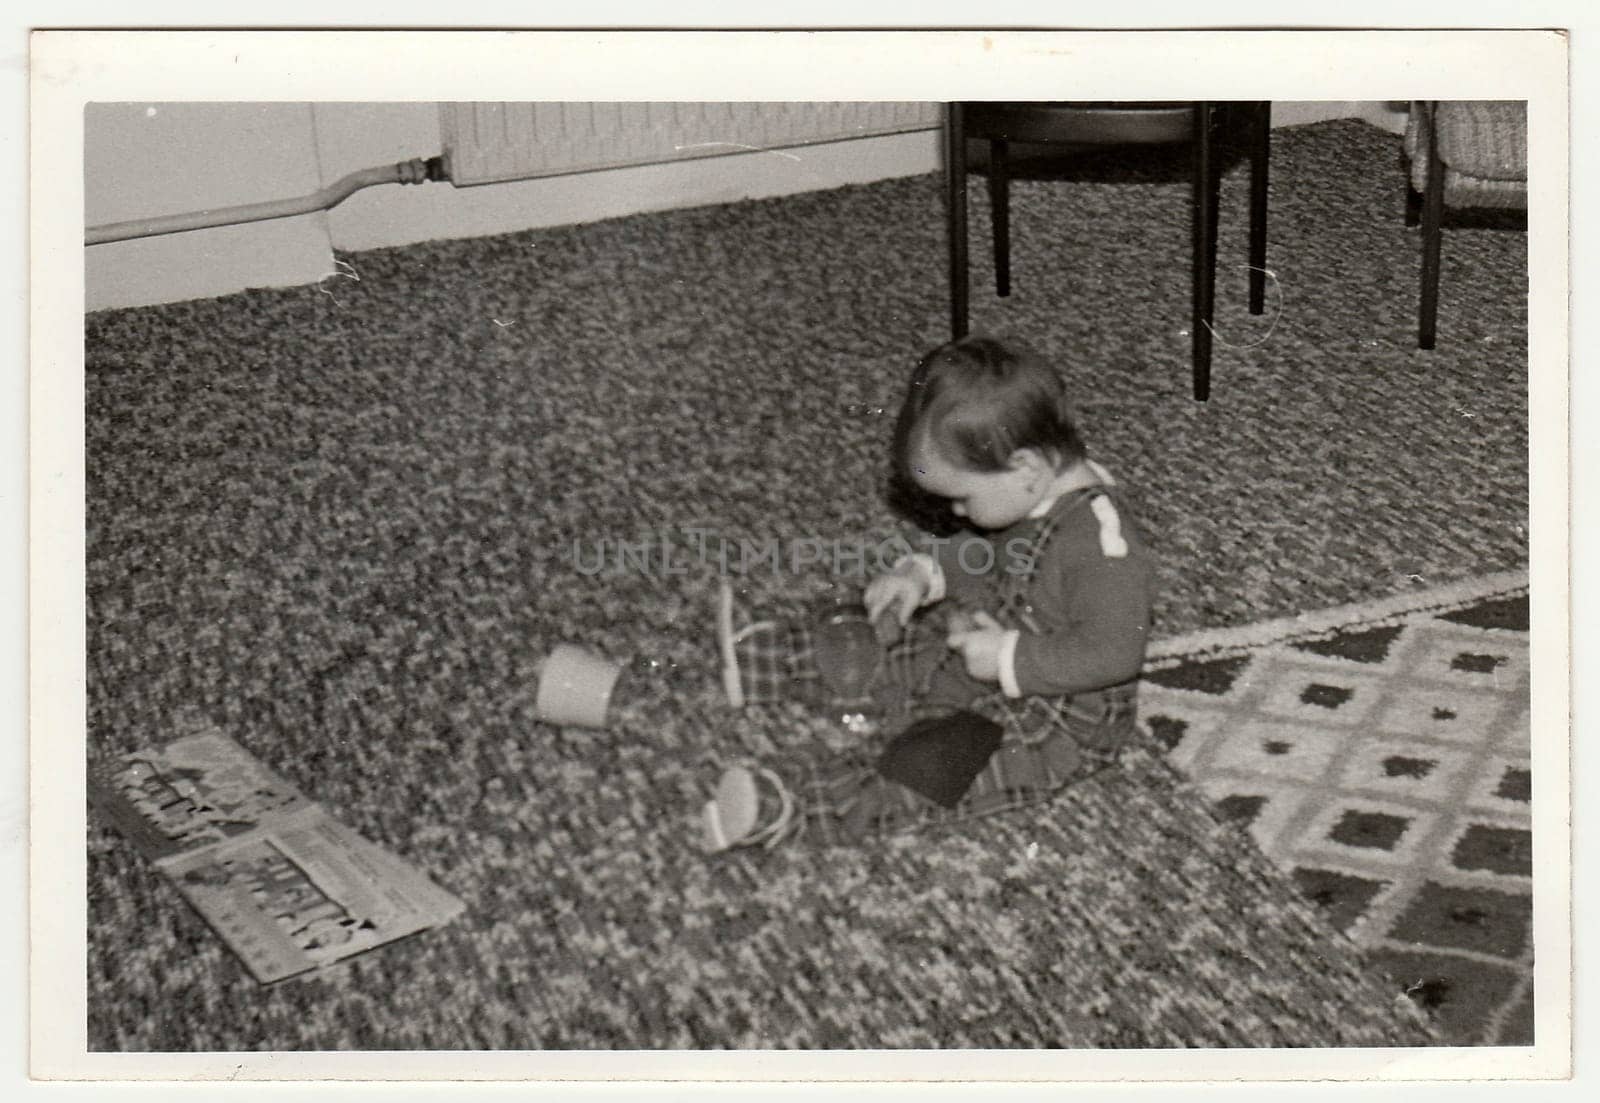 THE CZECHOSLOVAK SOCIALIST REPUBLIC - CIRCA 1970s: Retro photo shows child who plays with toy. Black and white vintage photography.